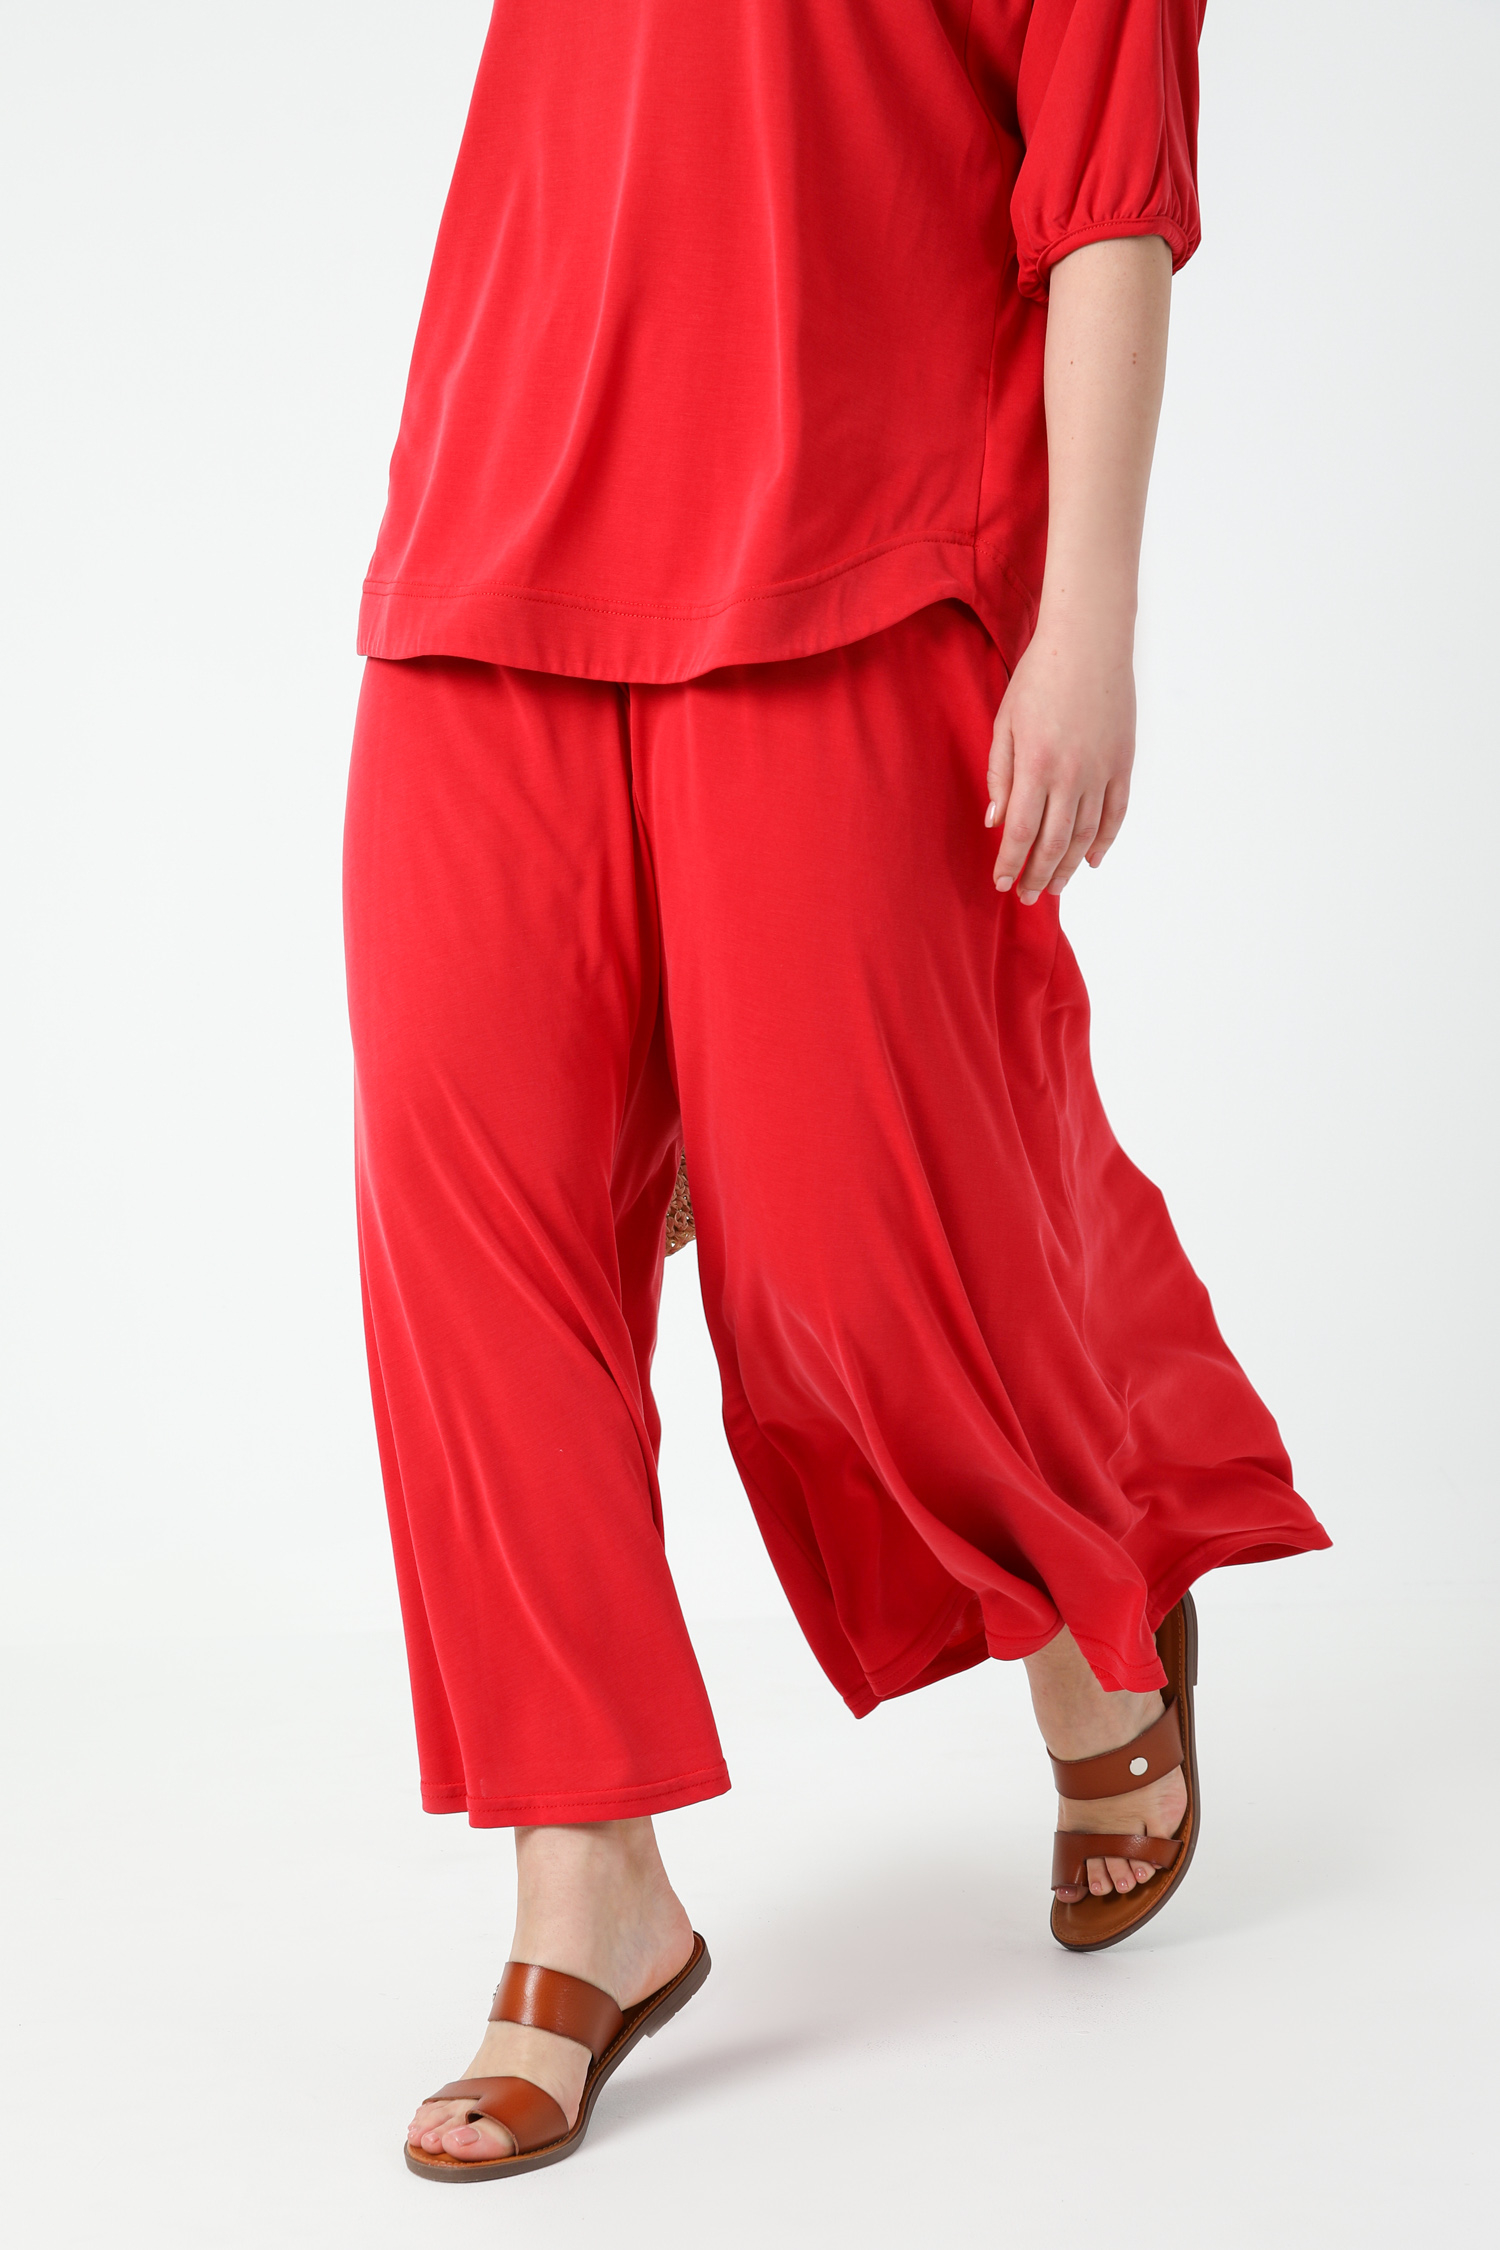 Modal culotte-style pants (delivery February 15/20)